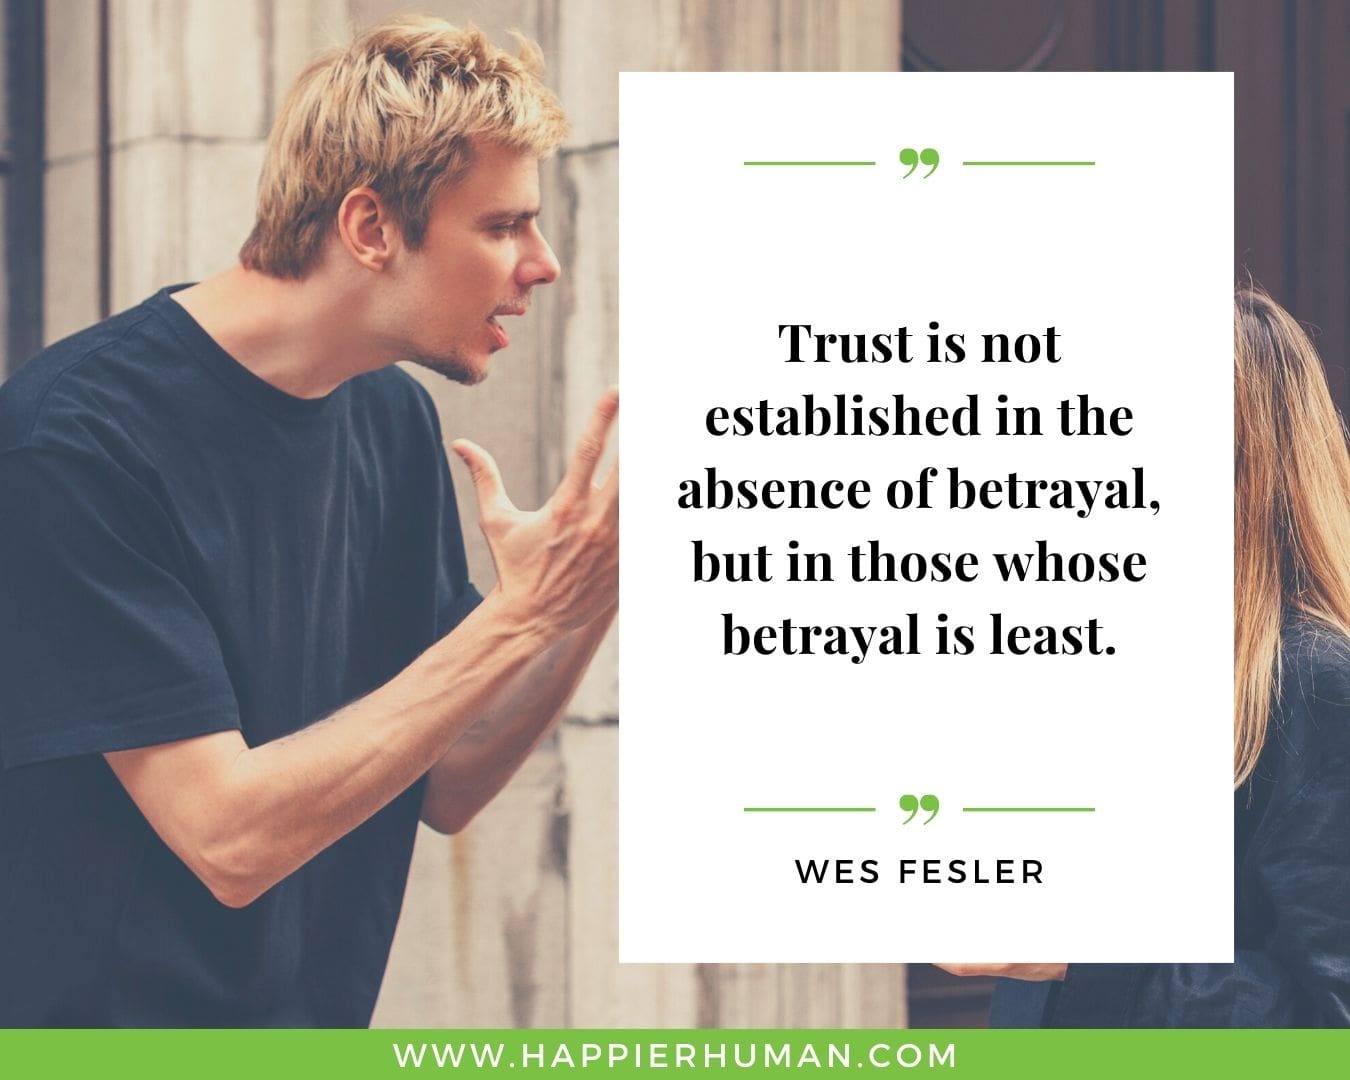 Broken Trust Quotes - “Trust is not established in the absence of betrayal, but in those whose betrayal is least.” - Wes Fesler